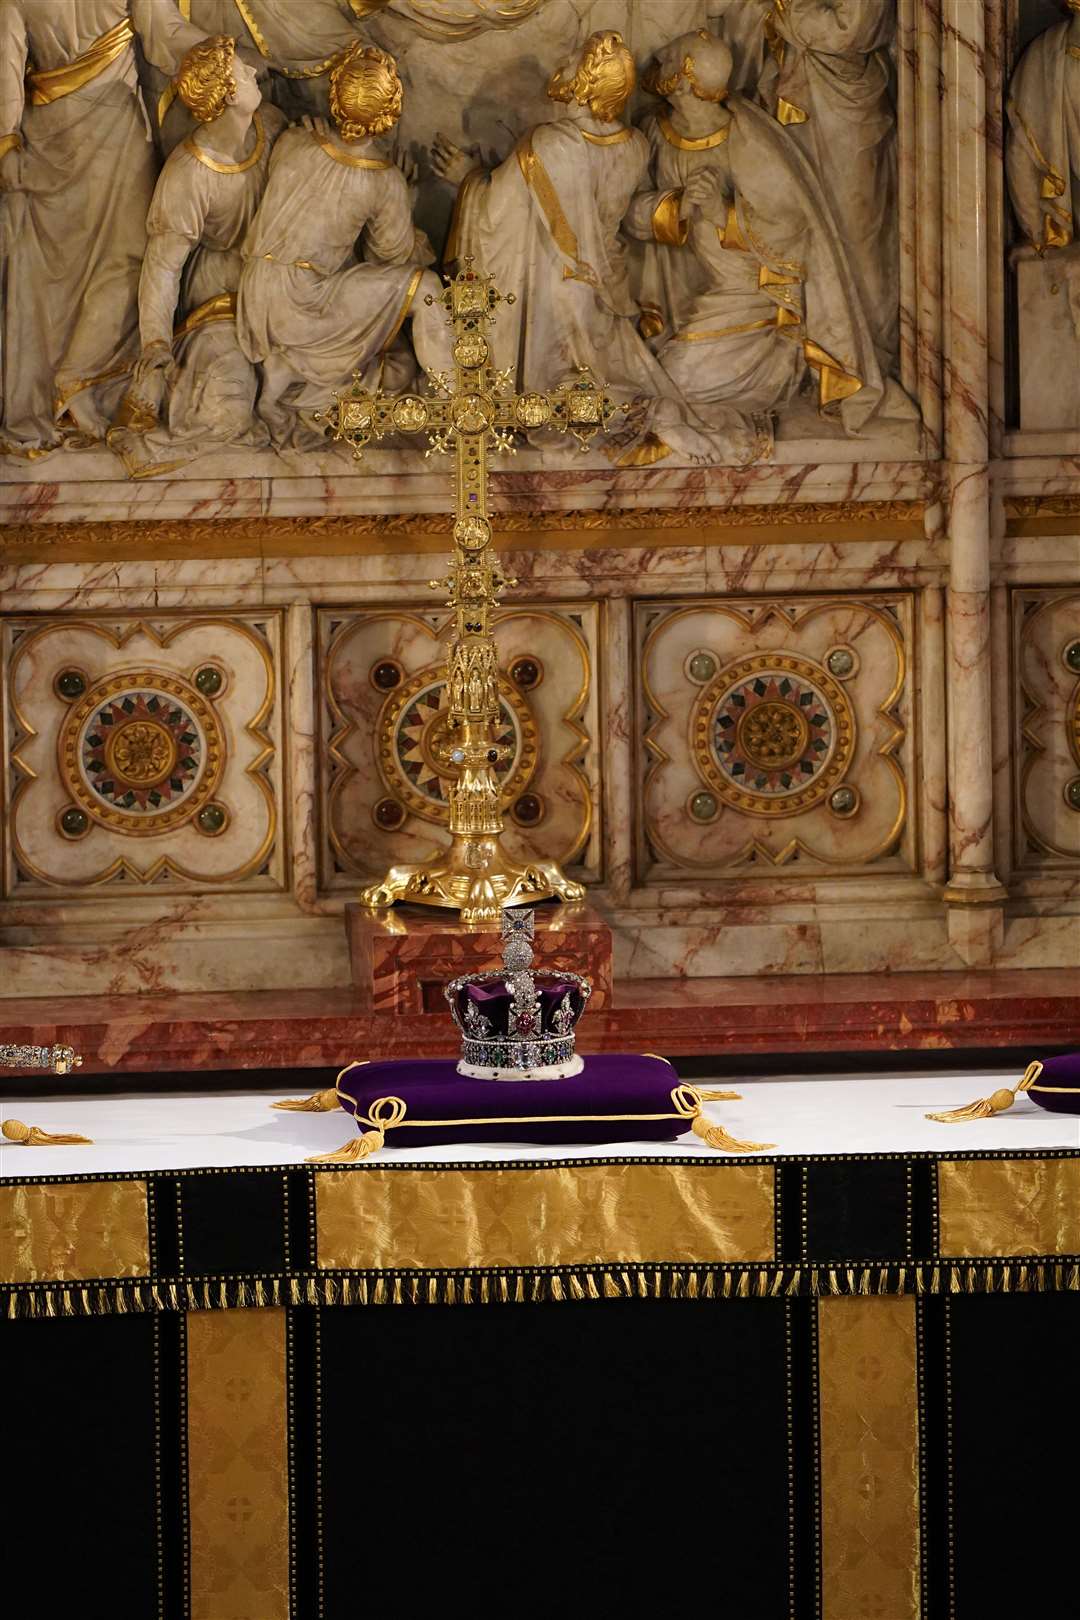 The Imperial State Crown on the high altar after being removed from the Queen’s coffin (Joe Giddens/PA)